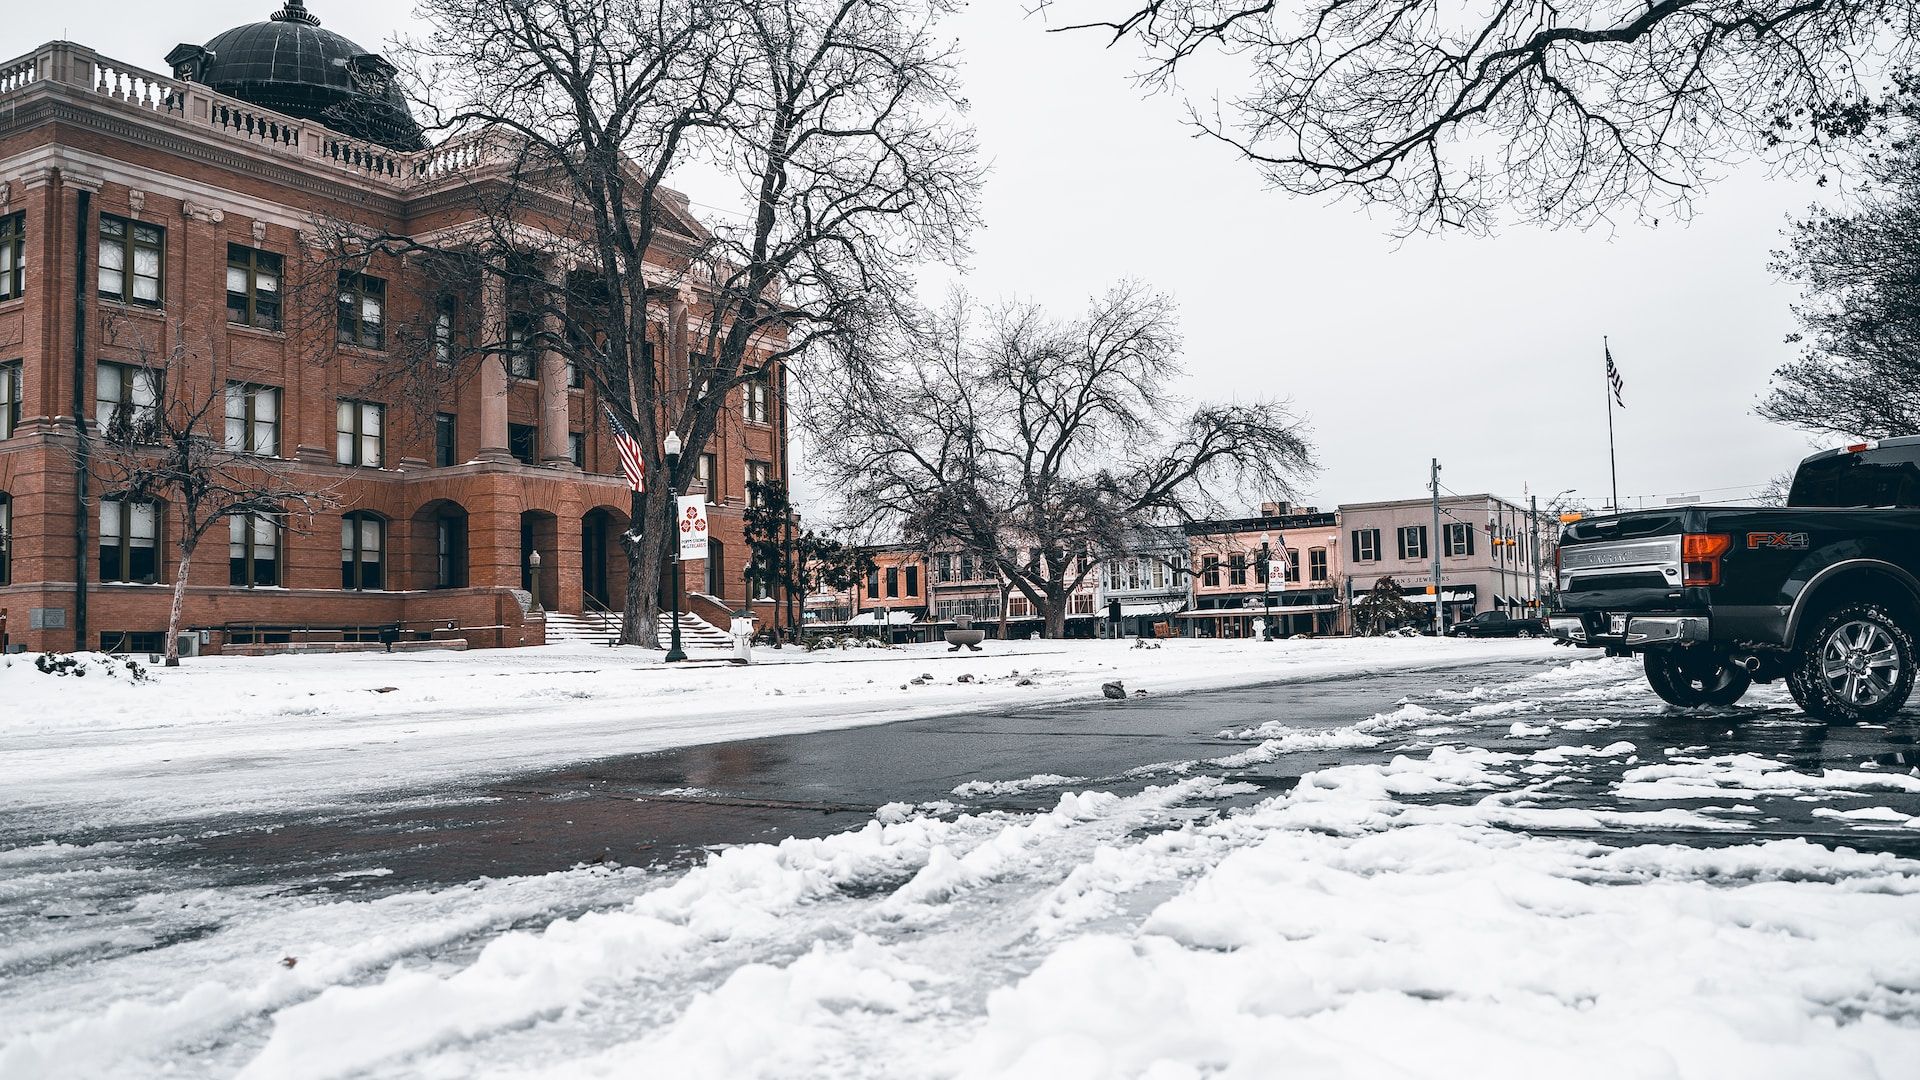 Georgetown, Texas in the winter